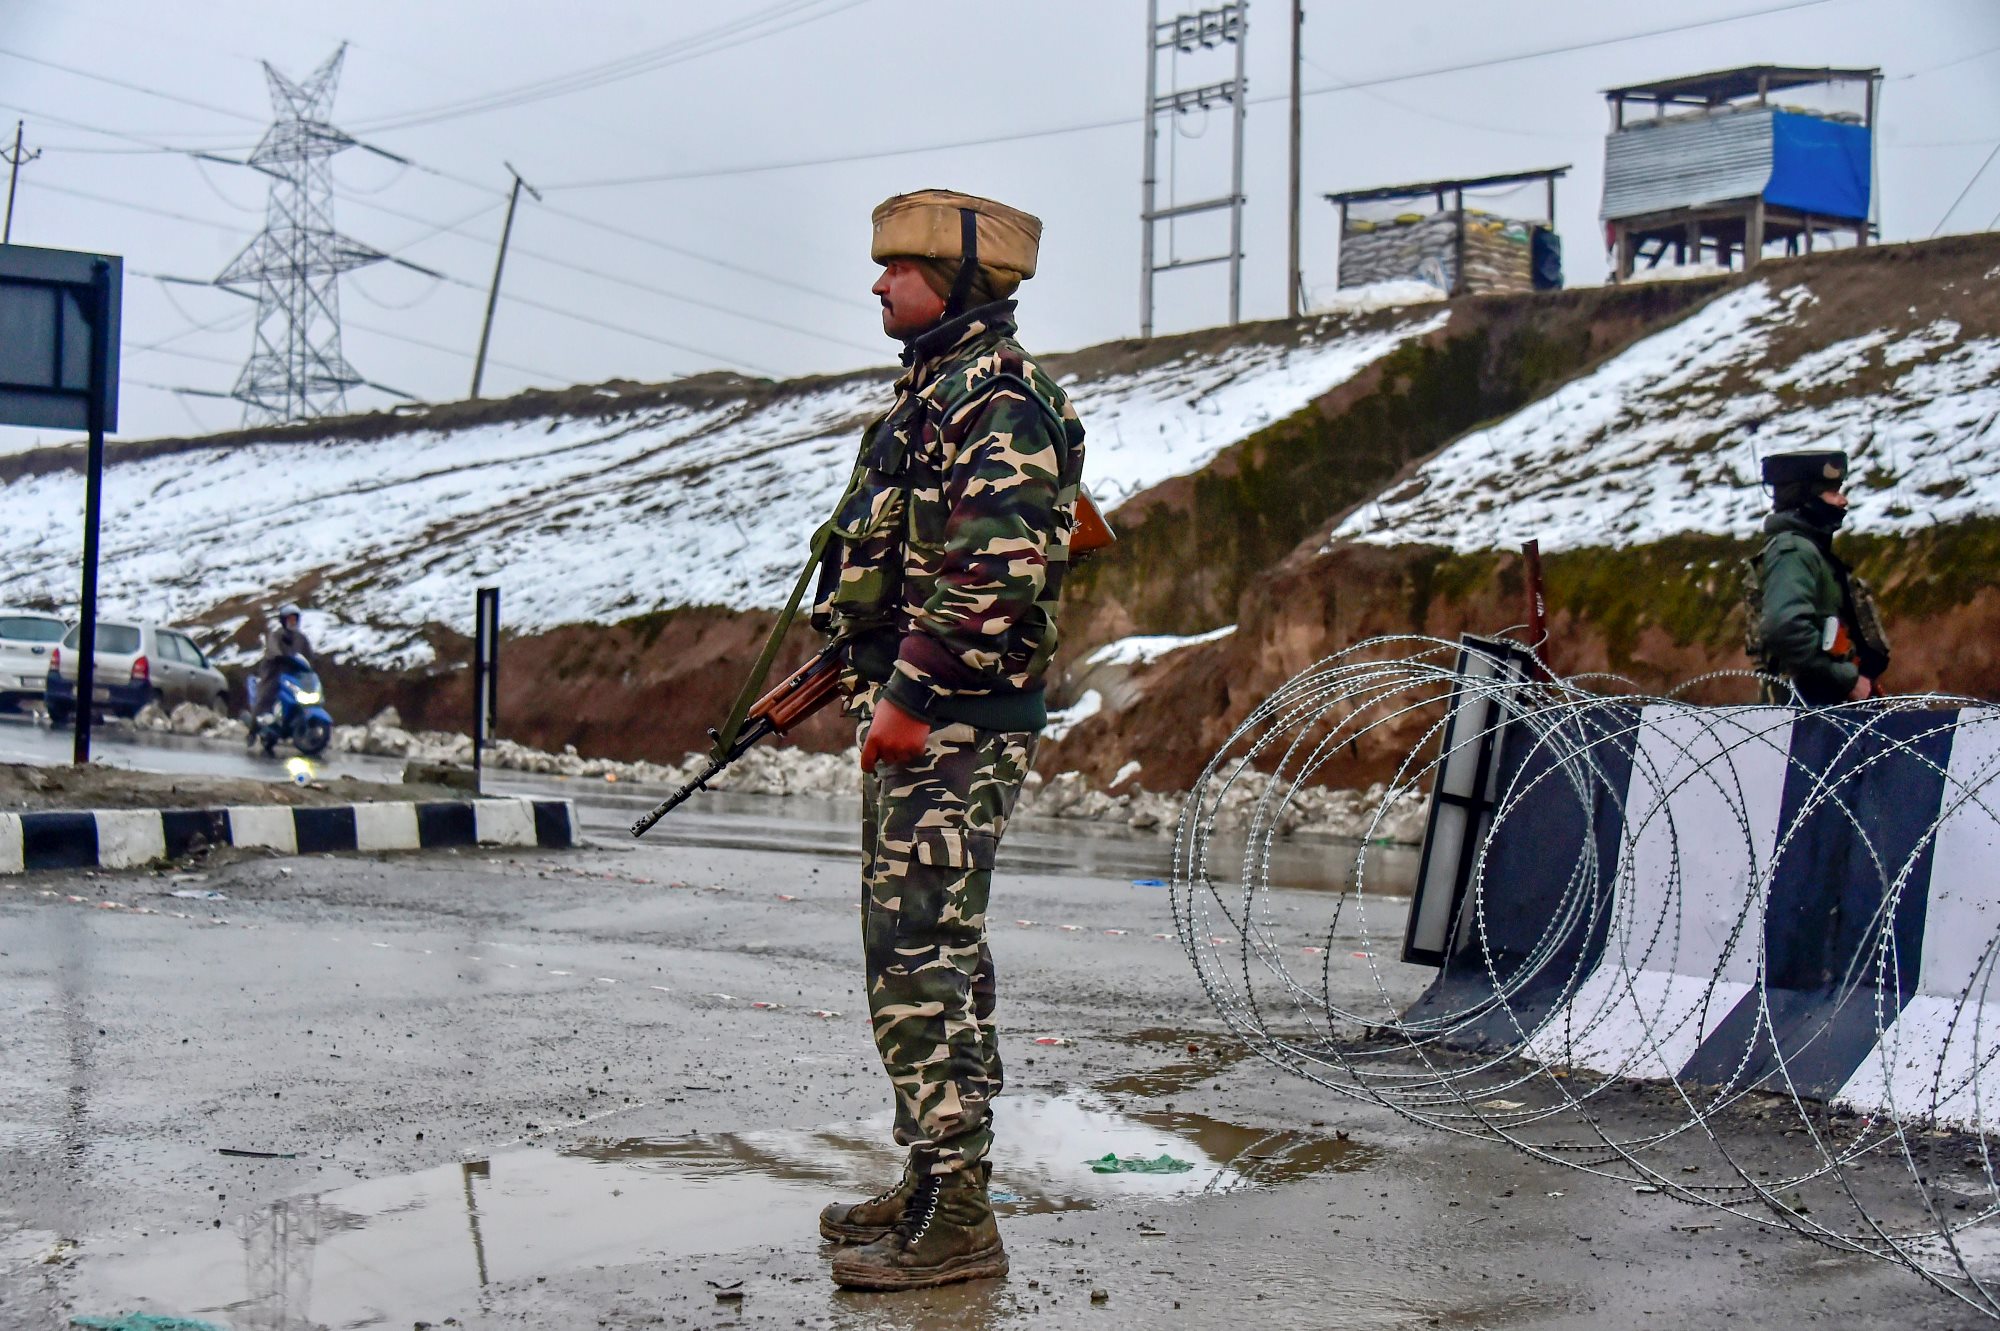 Awantipora: An army soldier stands guard near the site of the suicide bomb attack at Lathepora Awantipora in Pulwama district of south Kashmir, Thursday, February 14, 2019. At least 30 CRPF jawans were killed and dozens other injured when a CRPF convoy was attacked. (PTI Photo/S Irfan) (PTI2_14_2019_000154B)